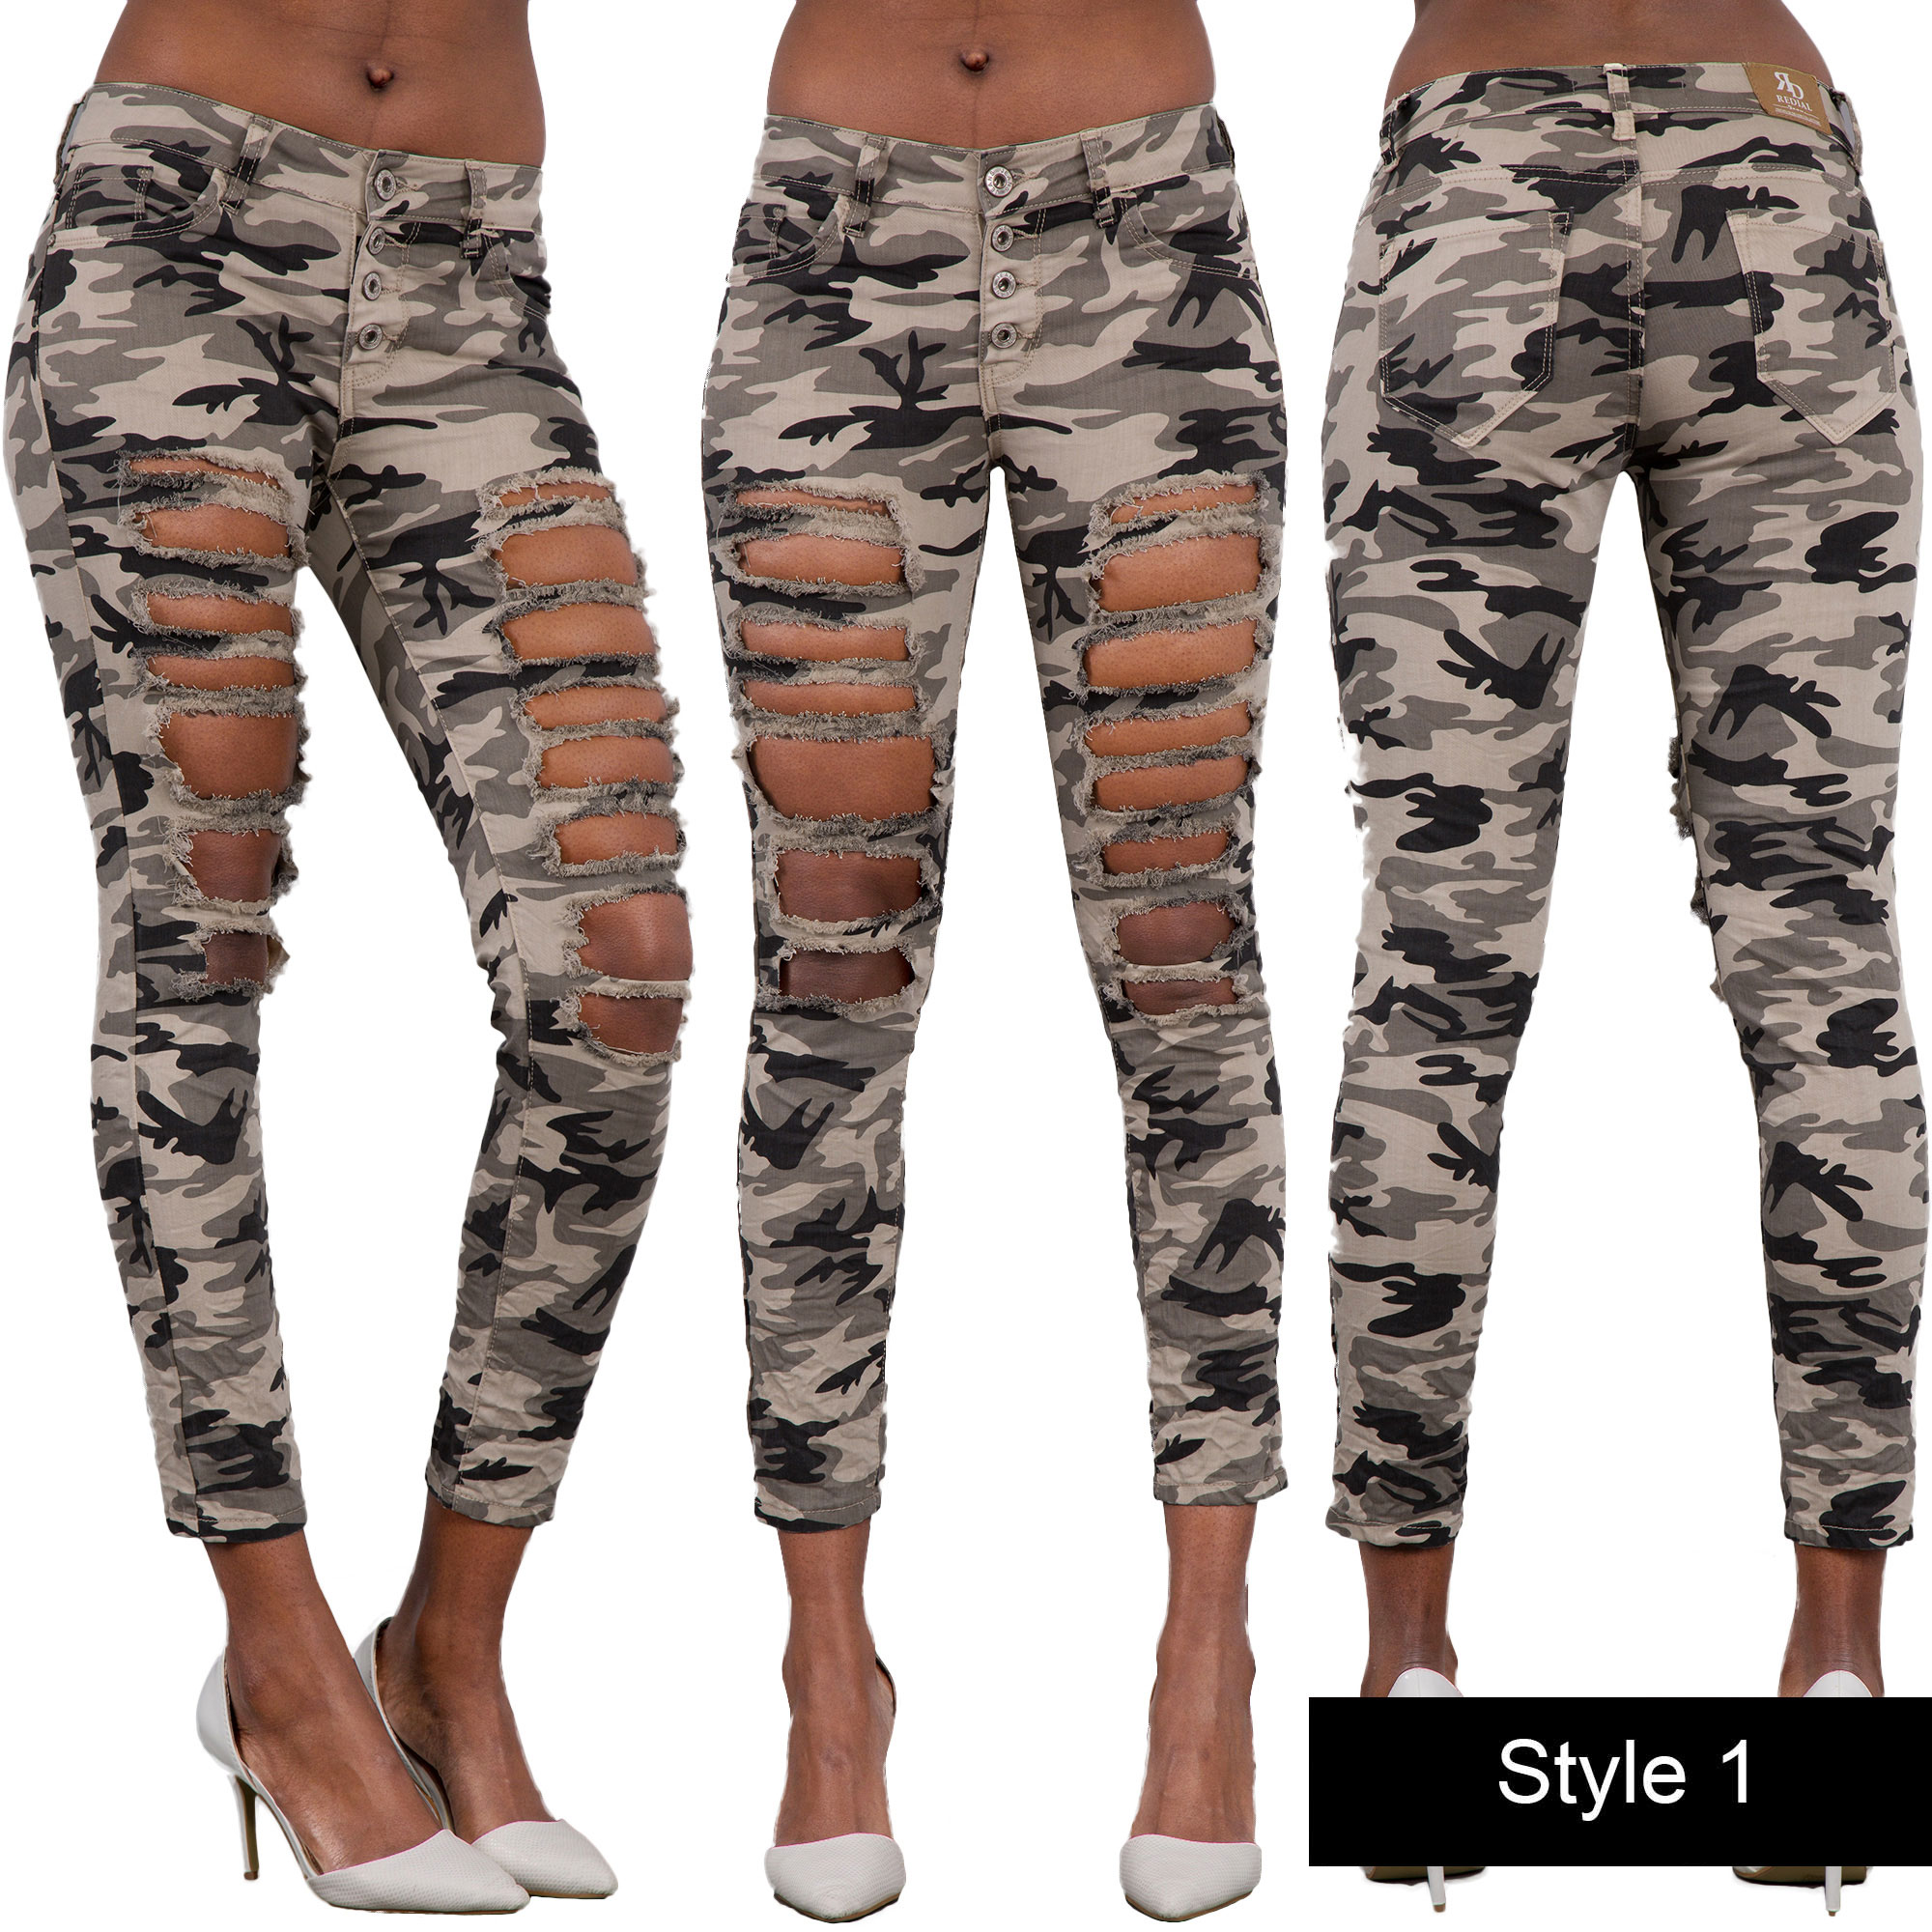 Women Sexy Camouflage Army Print Stretch Ripped Skinny Jeans Trousers Size 6 16 Ebay